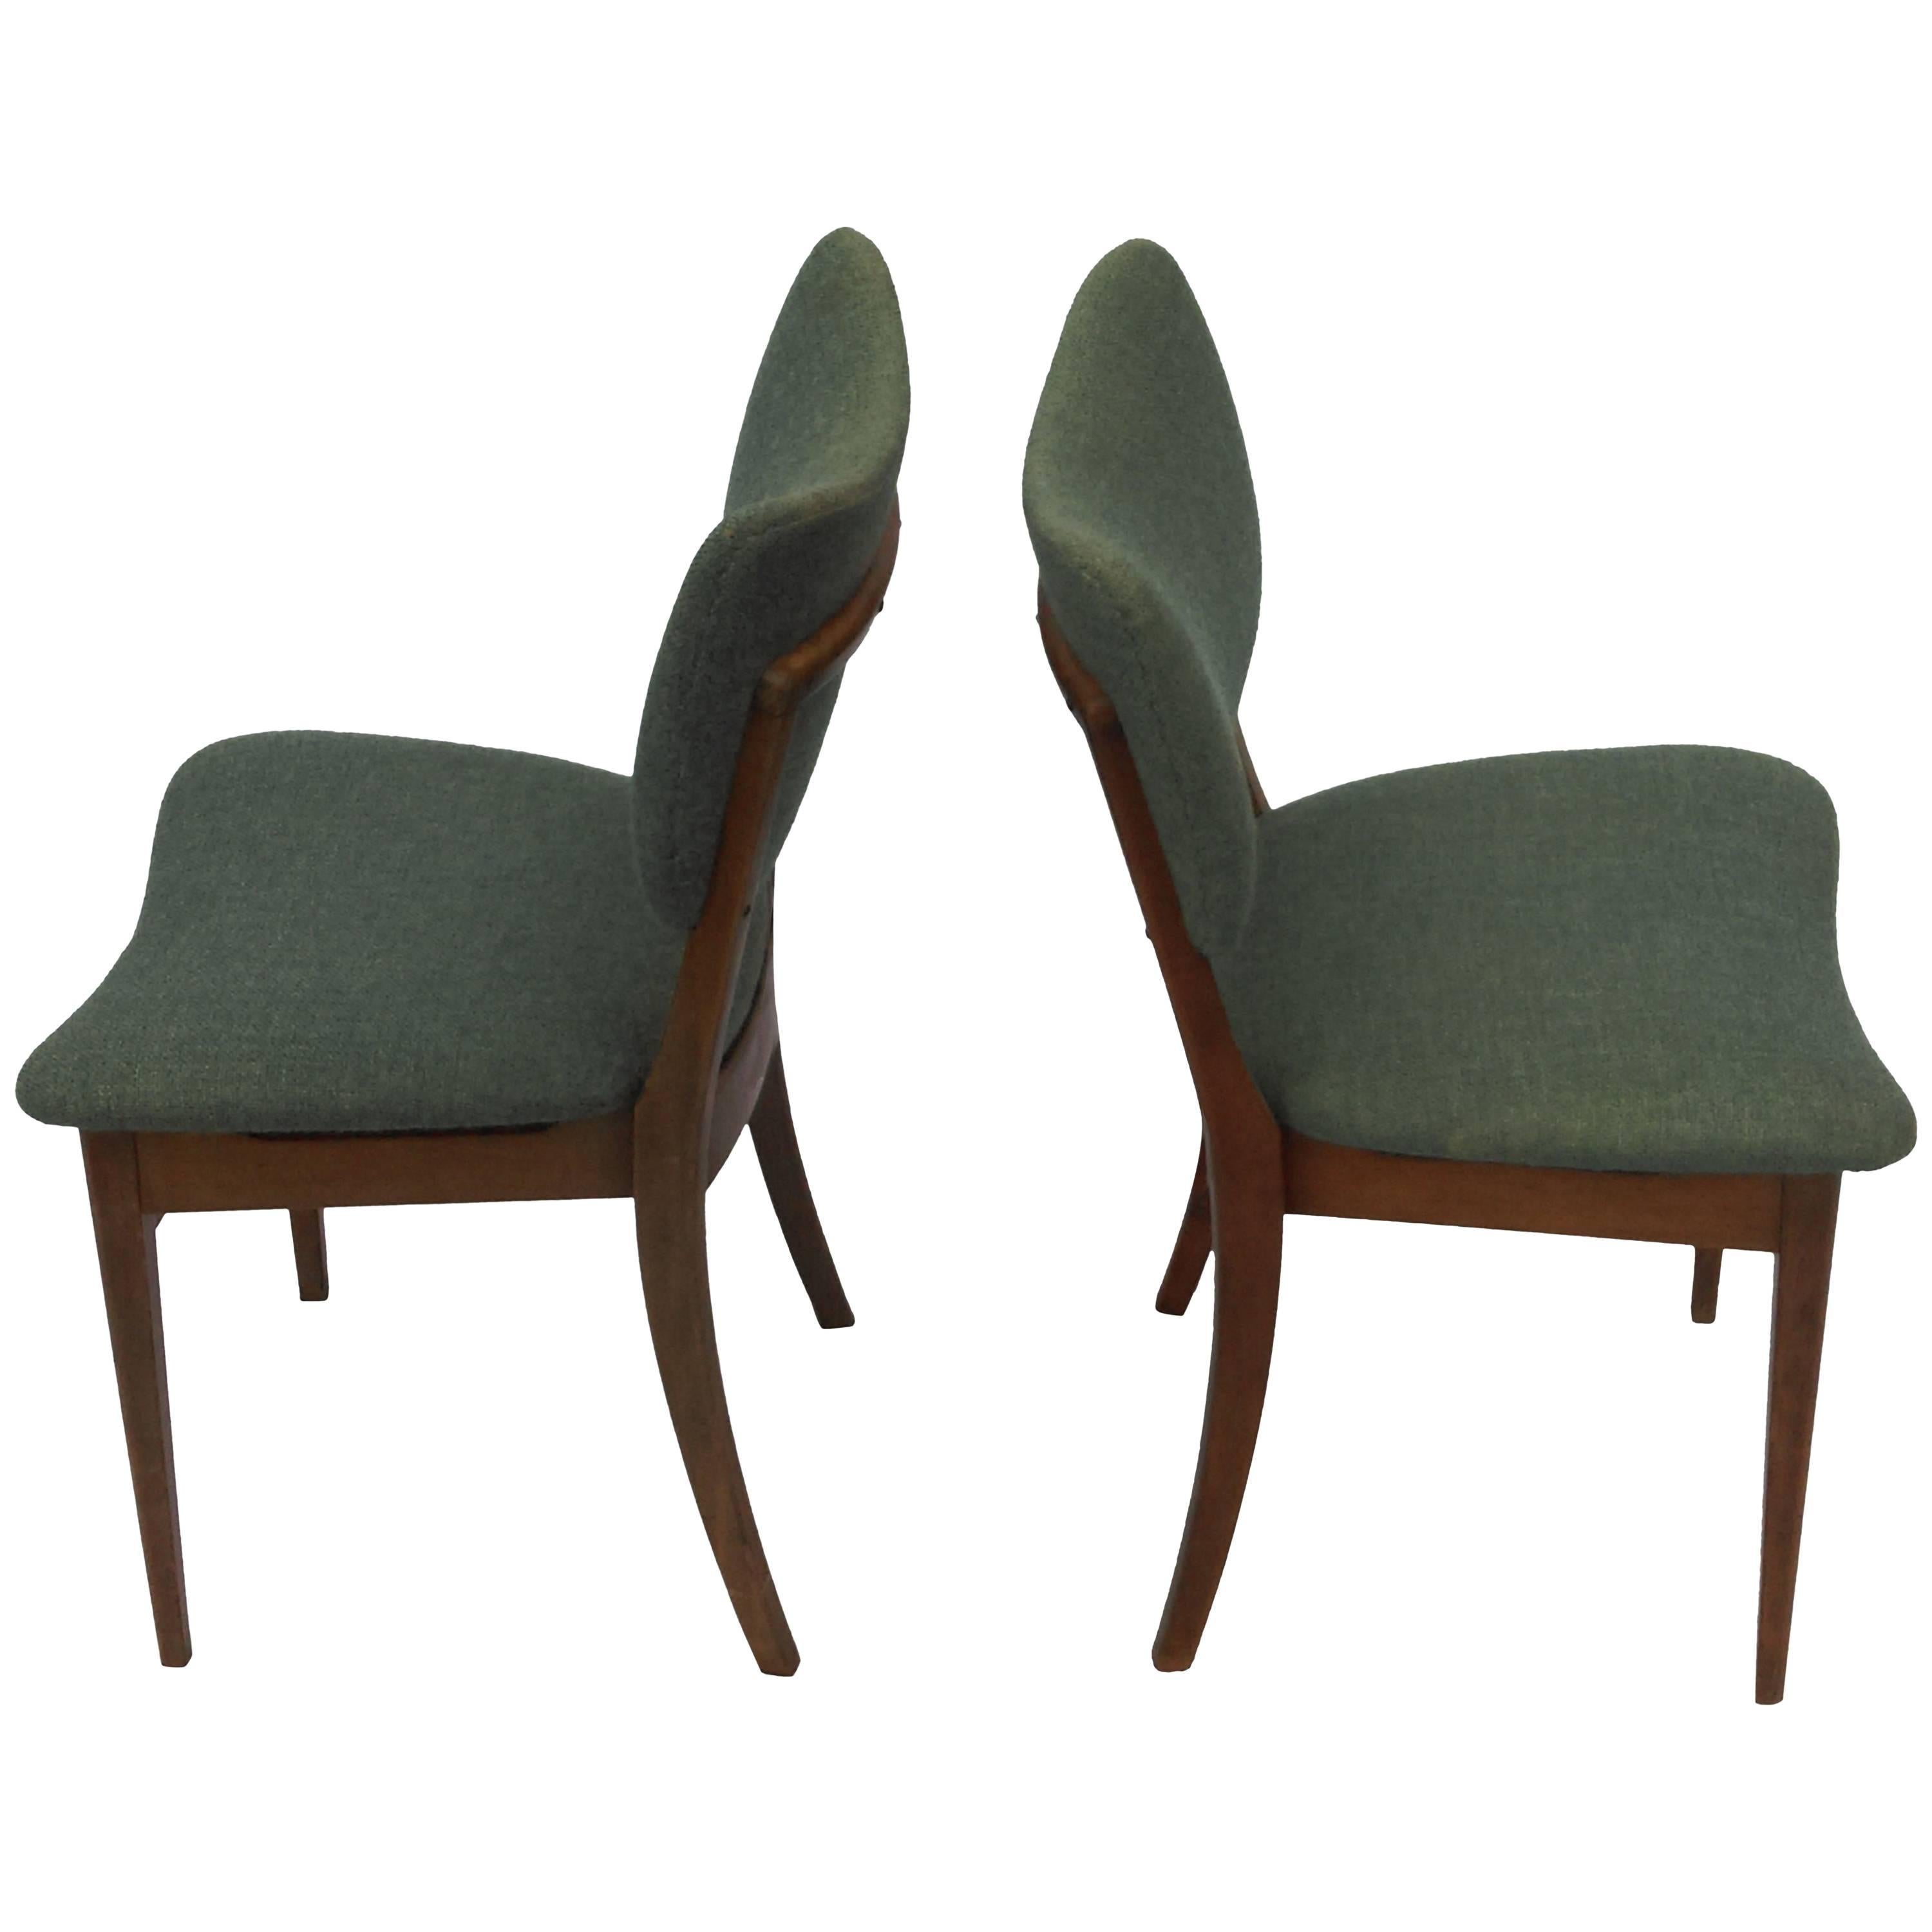 1940s Set of Two Danish Dining Chairs in Tanned Beech and Blue Fabric